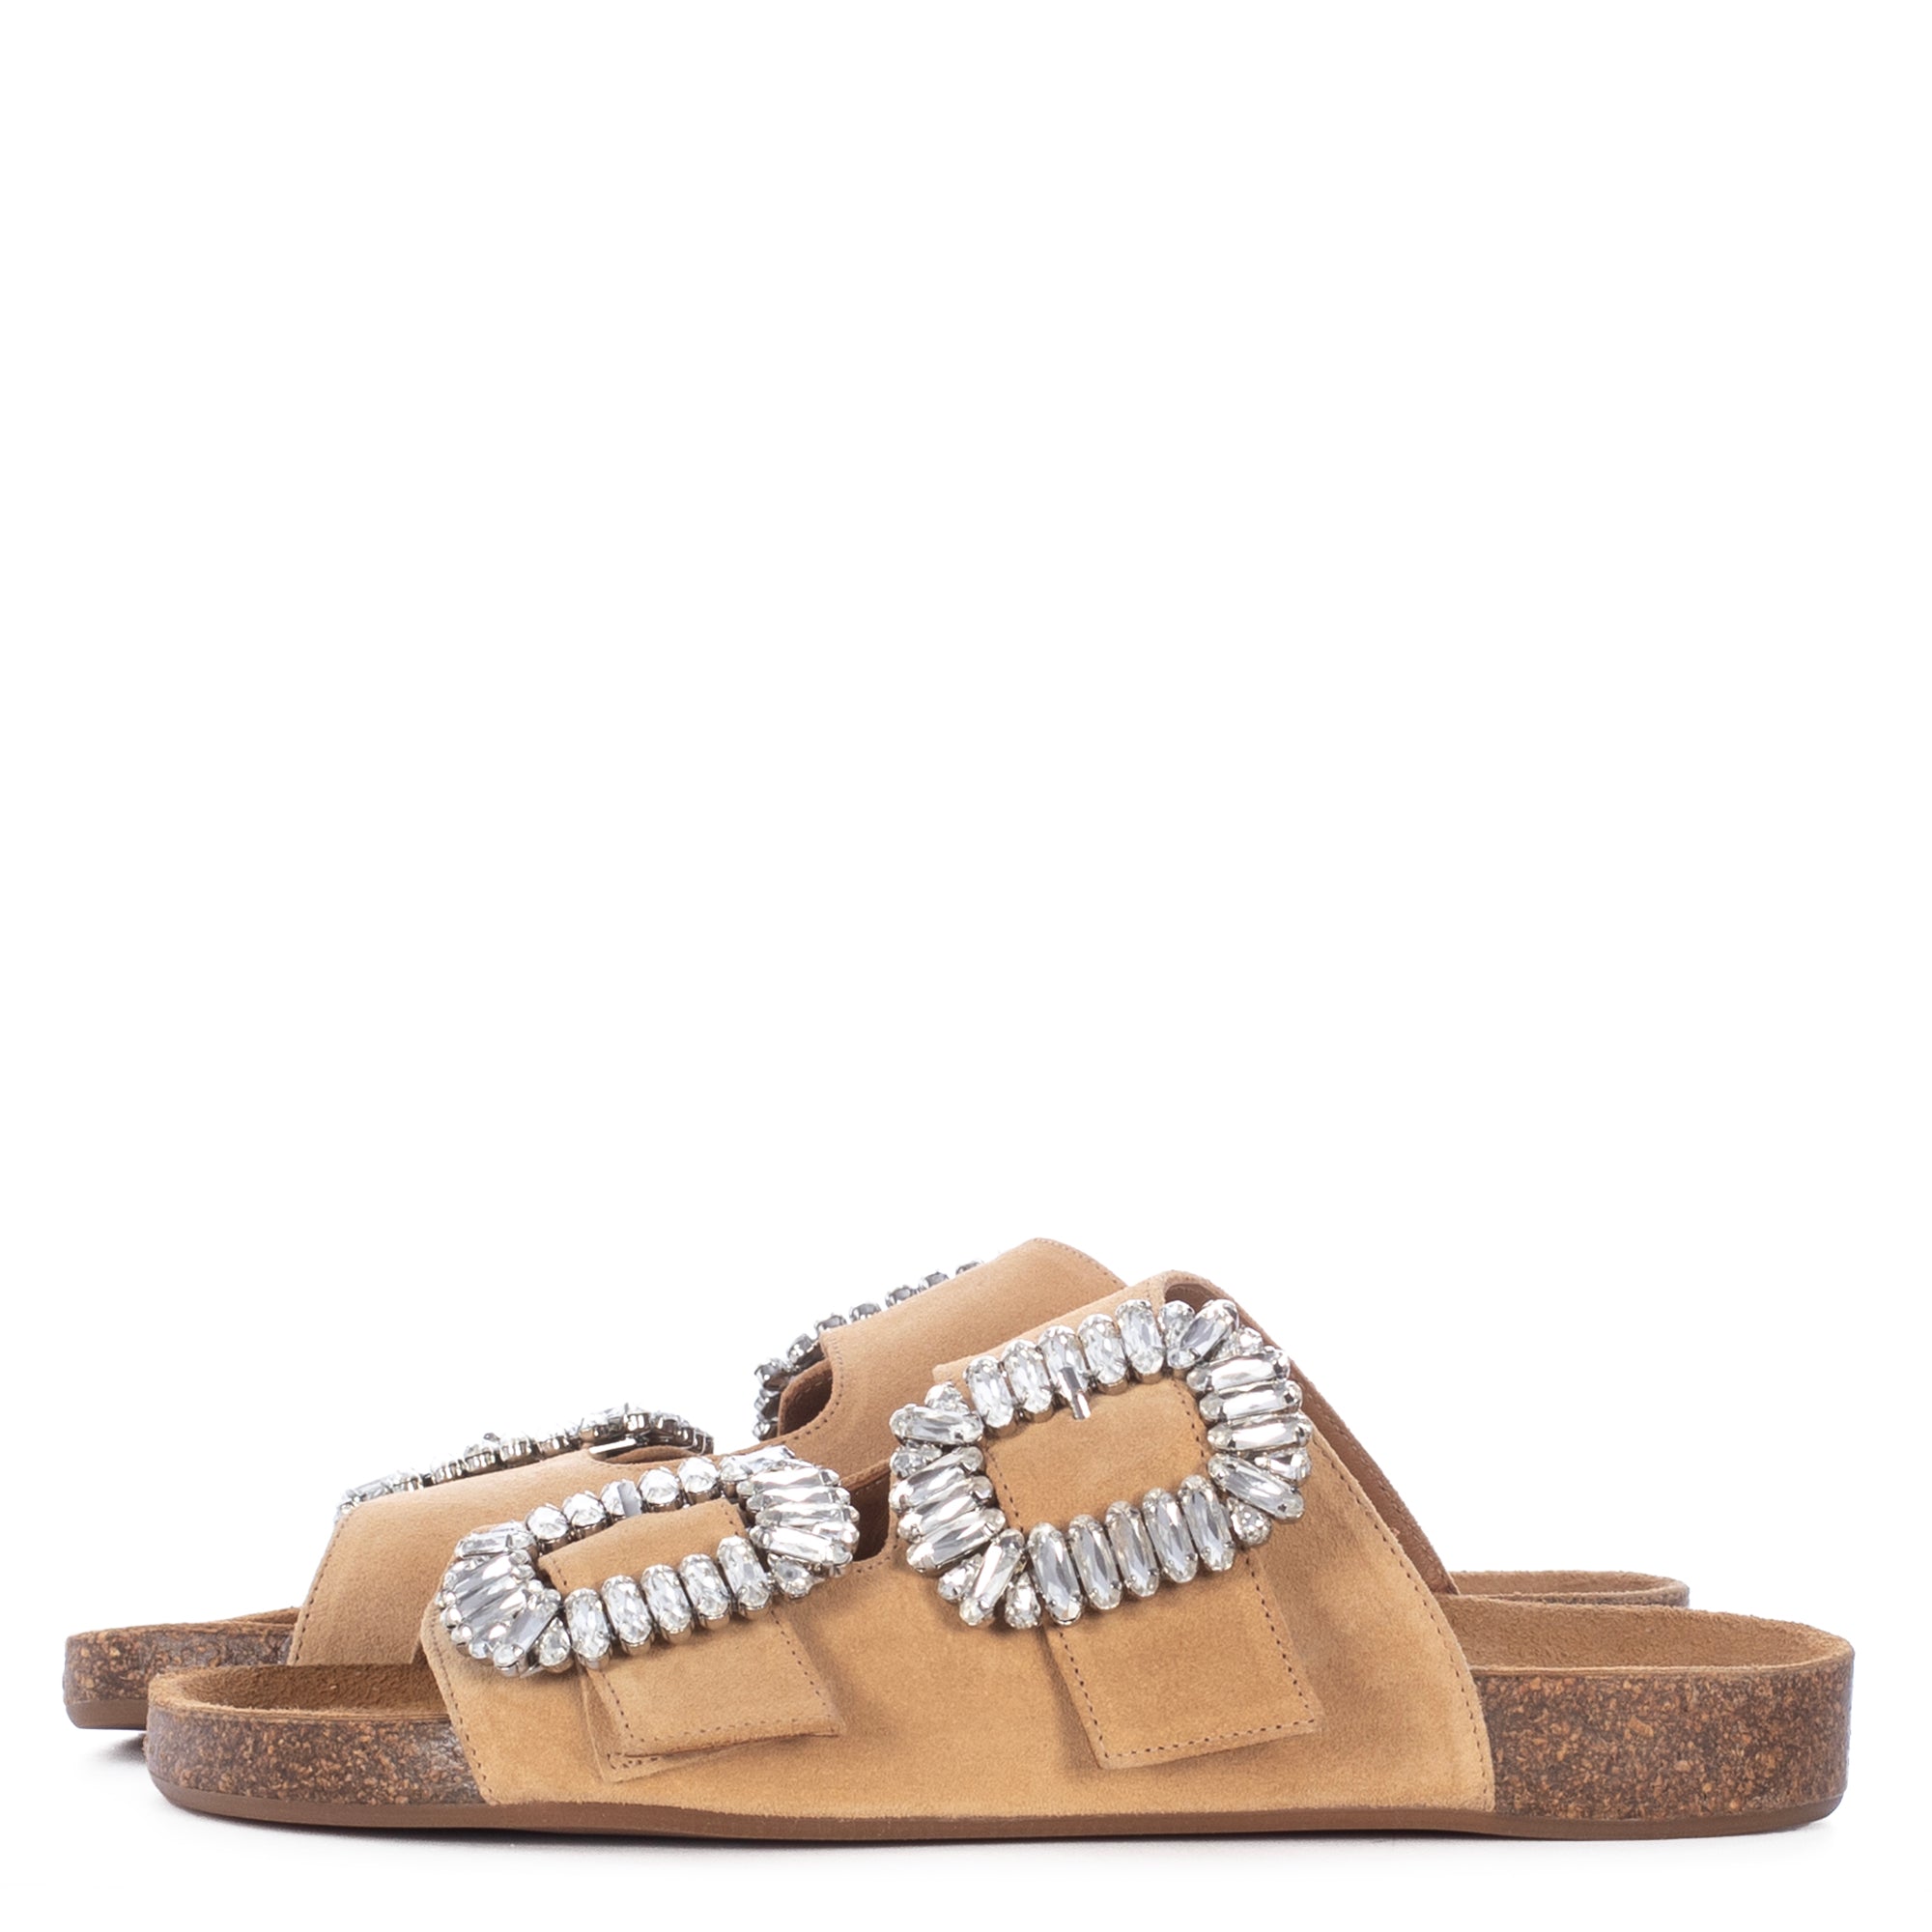 SAND SUEDE SANDALS WITH CRYSTALS